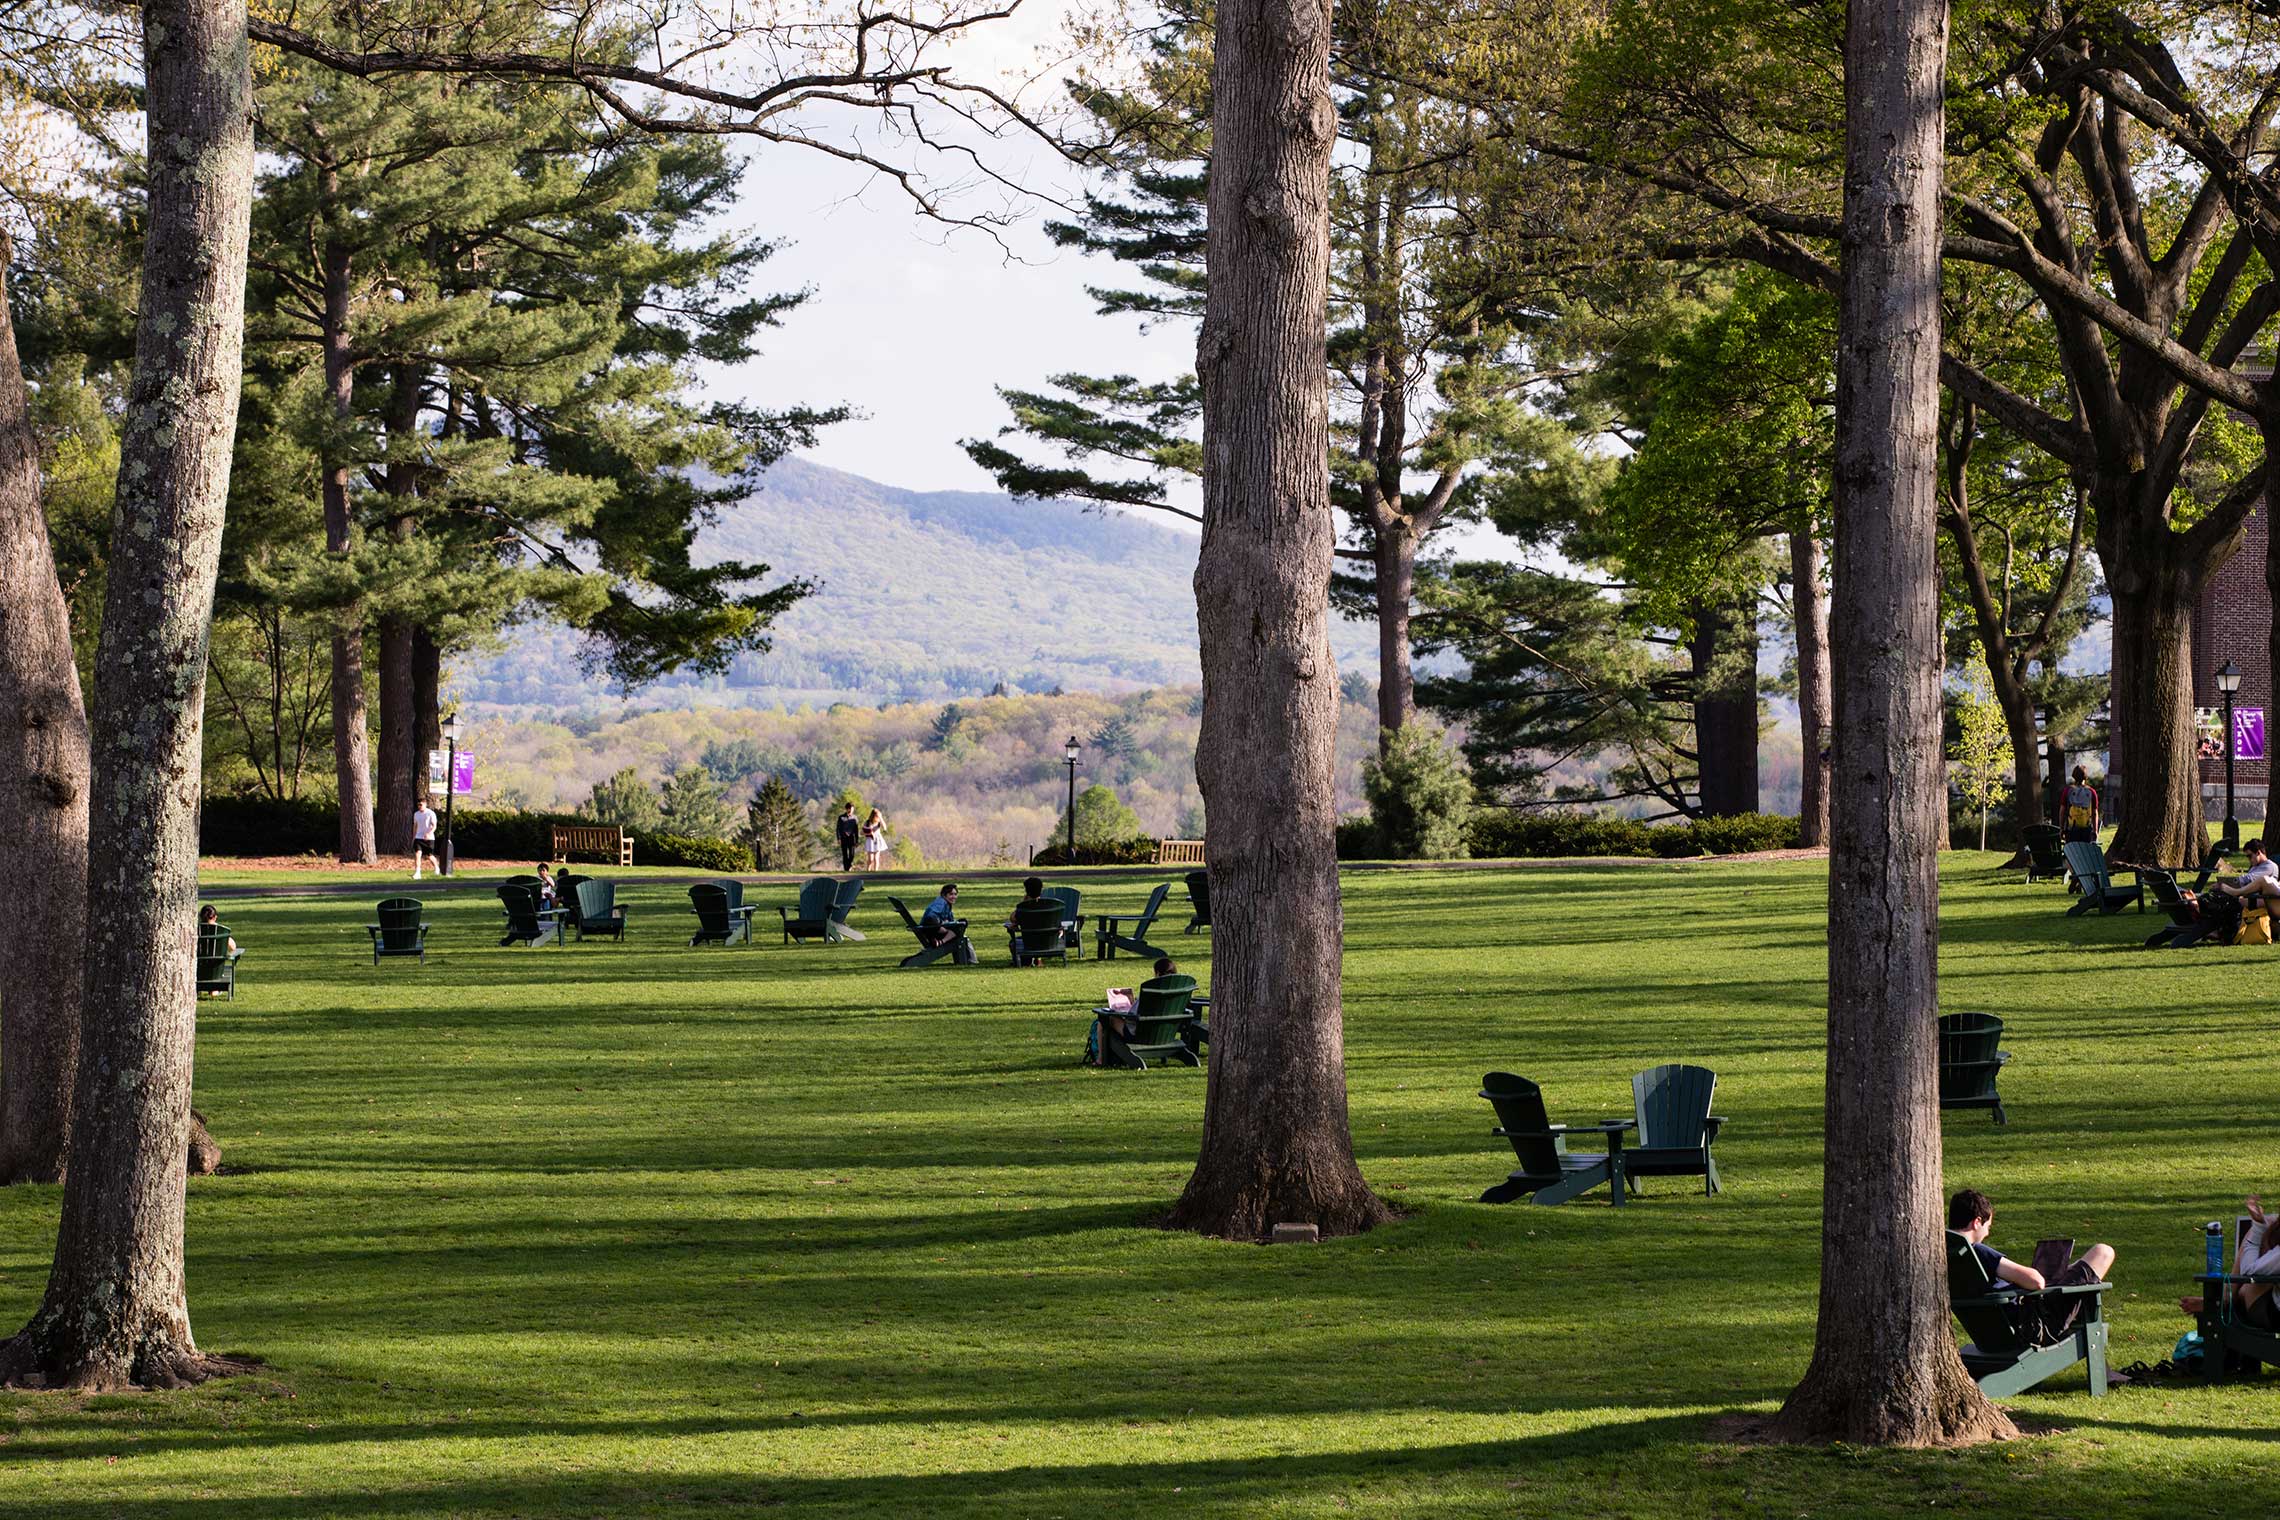 Adriondack chairs on the main quad on a sunny spring day.